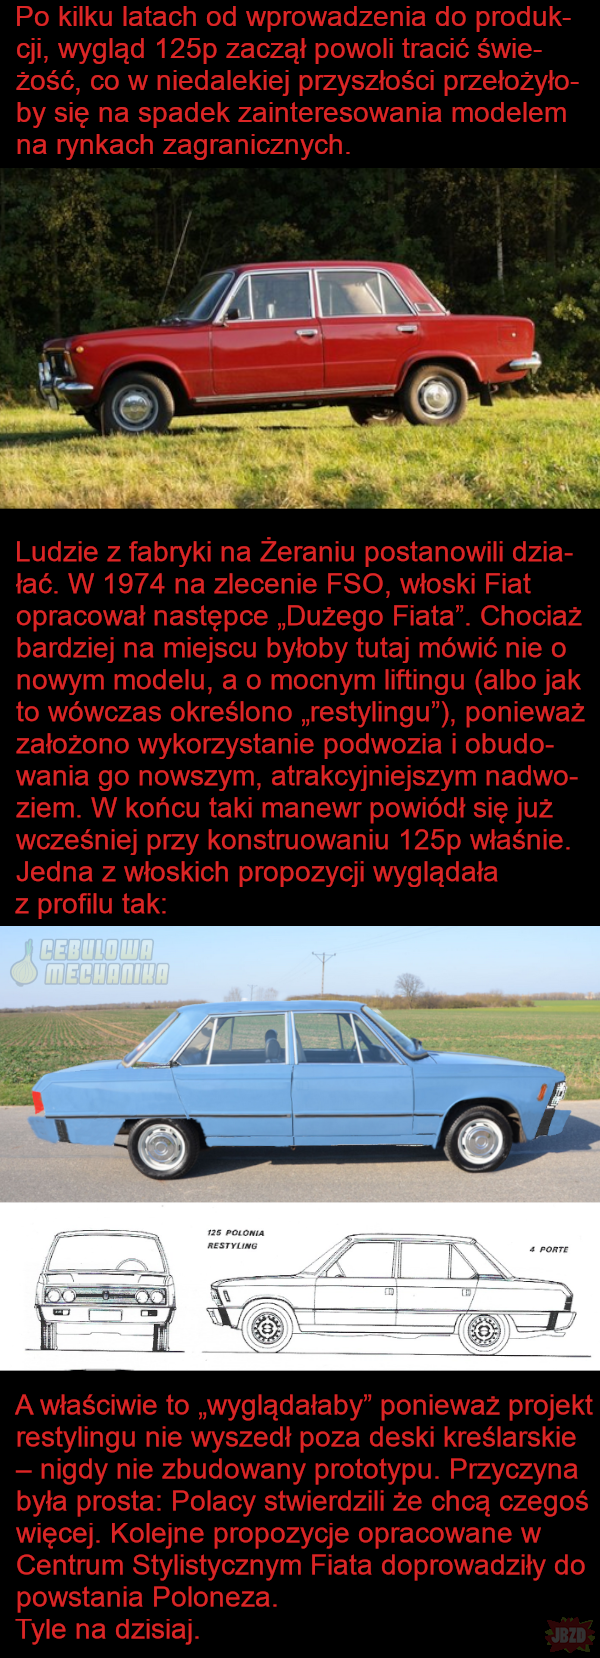 125p Polonia Restyling